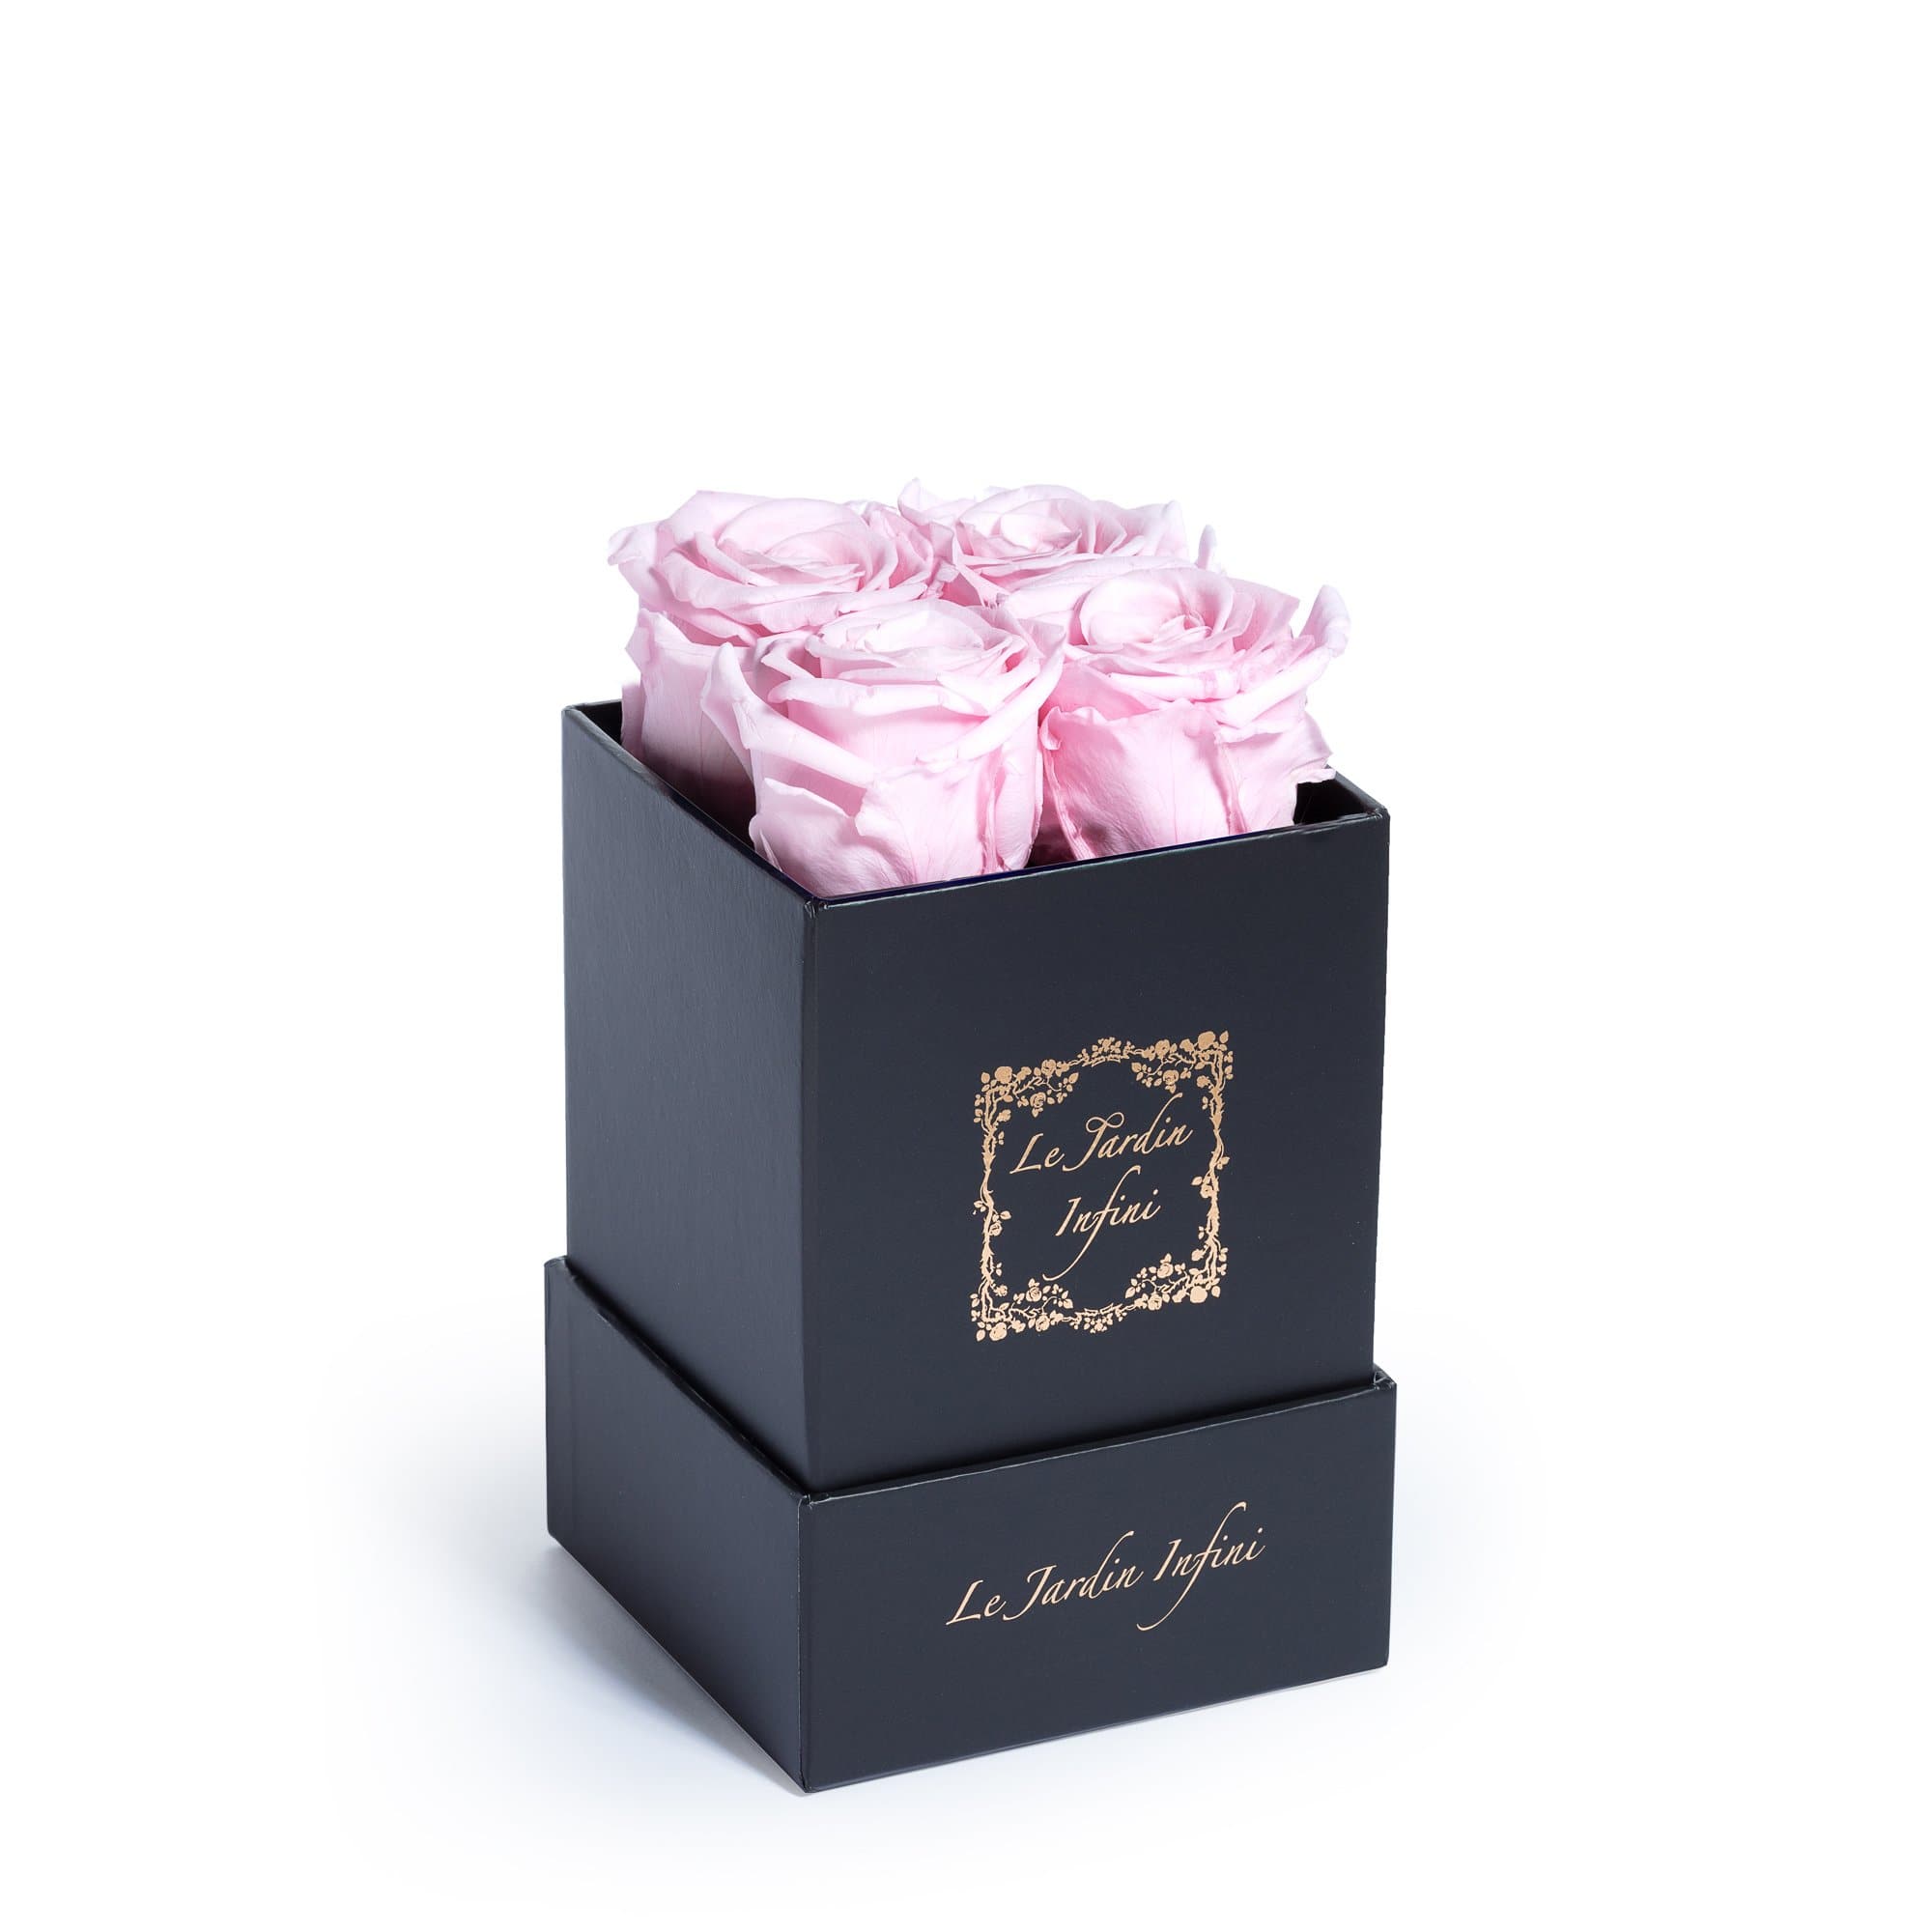 Soft Pink Preserved Roses - Small Square Black Box